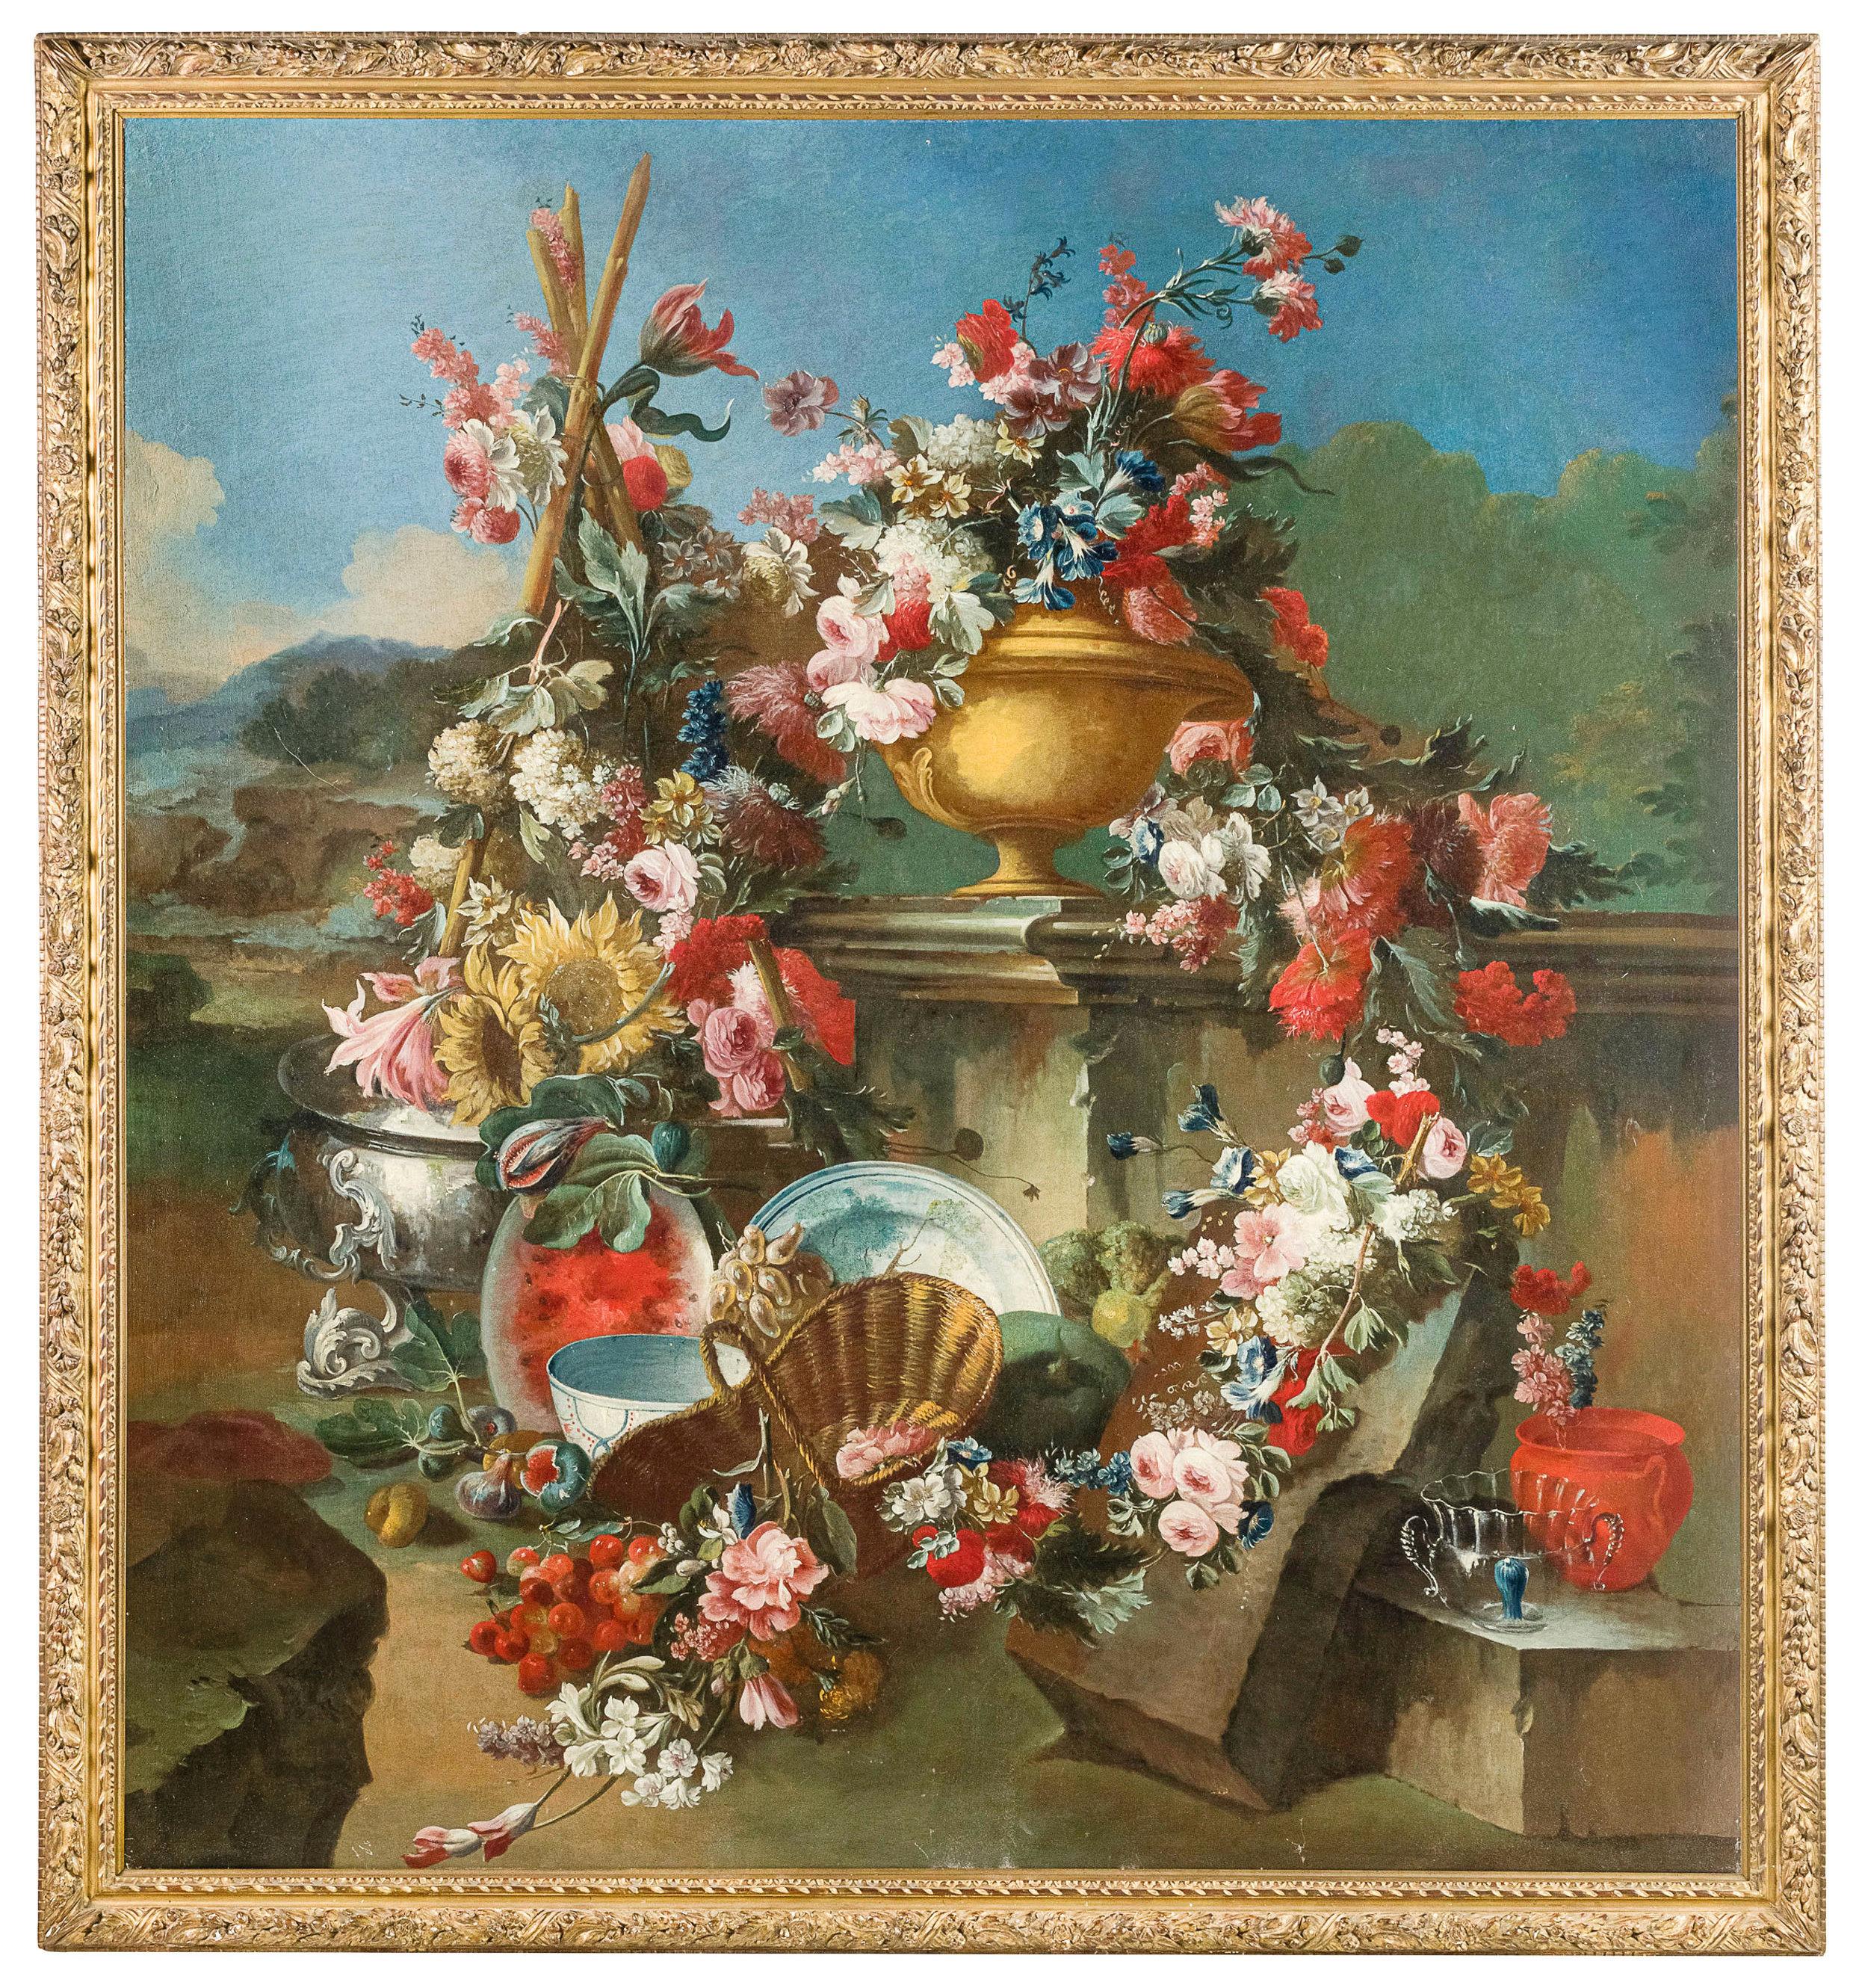 18th Century, Italian painted with still Life by Francesco Lavagna.

The fine and imposing painting, accompanied by a frame in carved and gilded wood, depicts a sumptuous composition of flowers inserted in an elegant outdoor environment. It is the